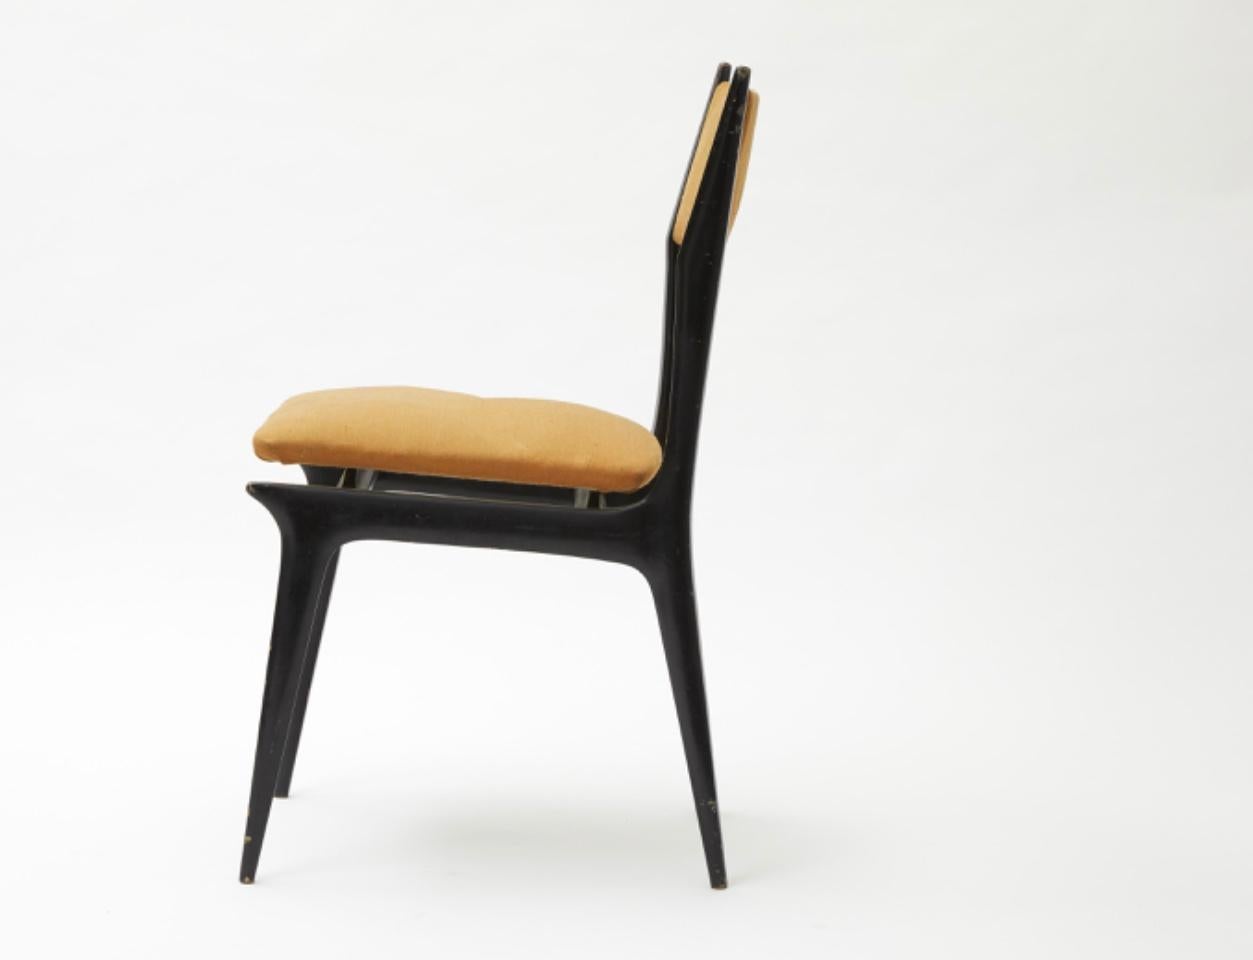 Ico Parisi chairs wood brass, 1950, Italy.